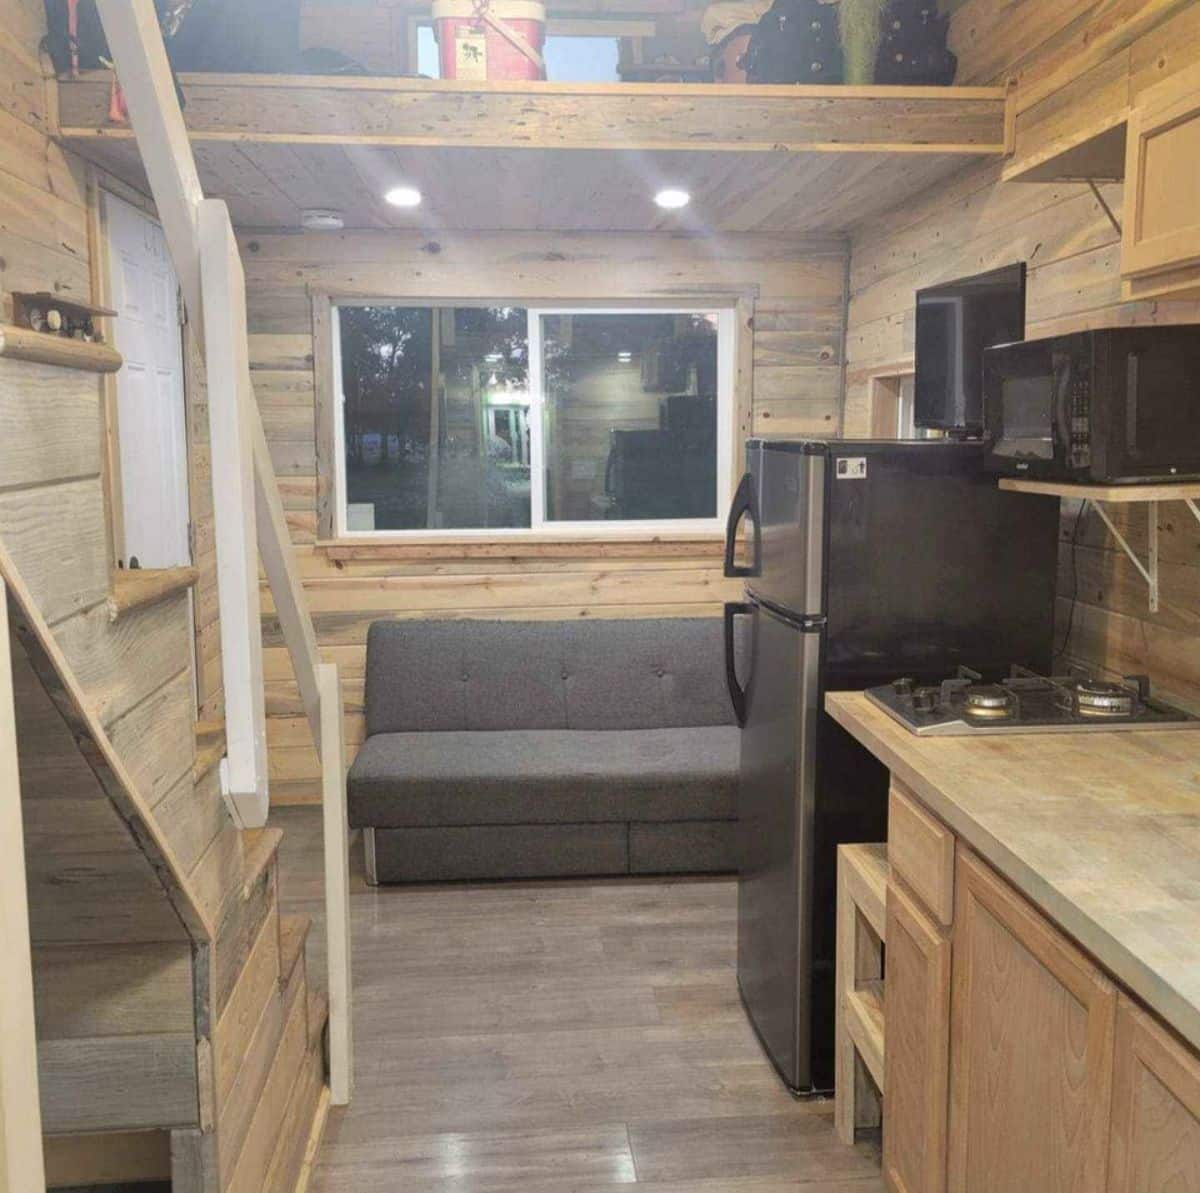 Living area of 20’ tiny house with two lofts